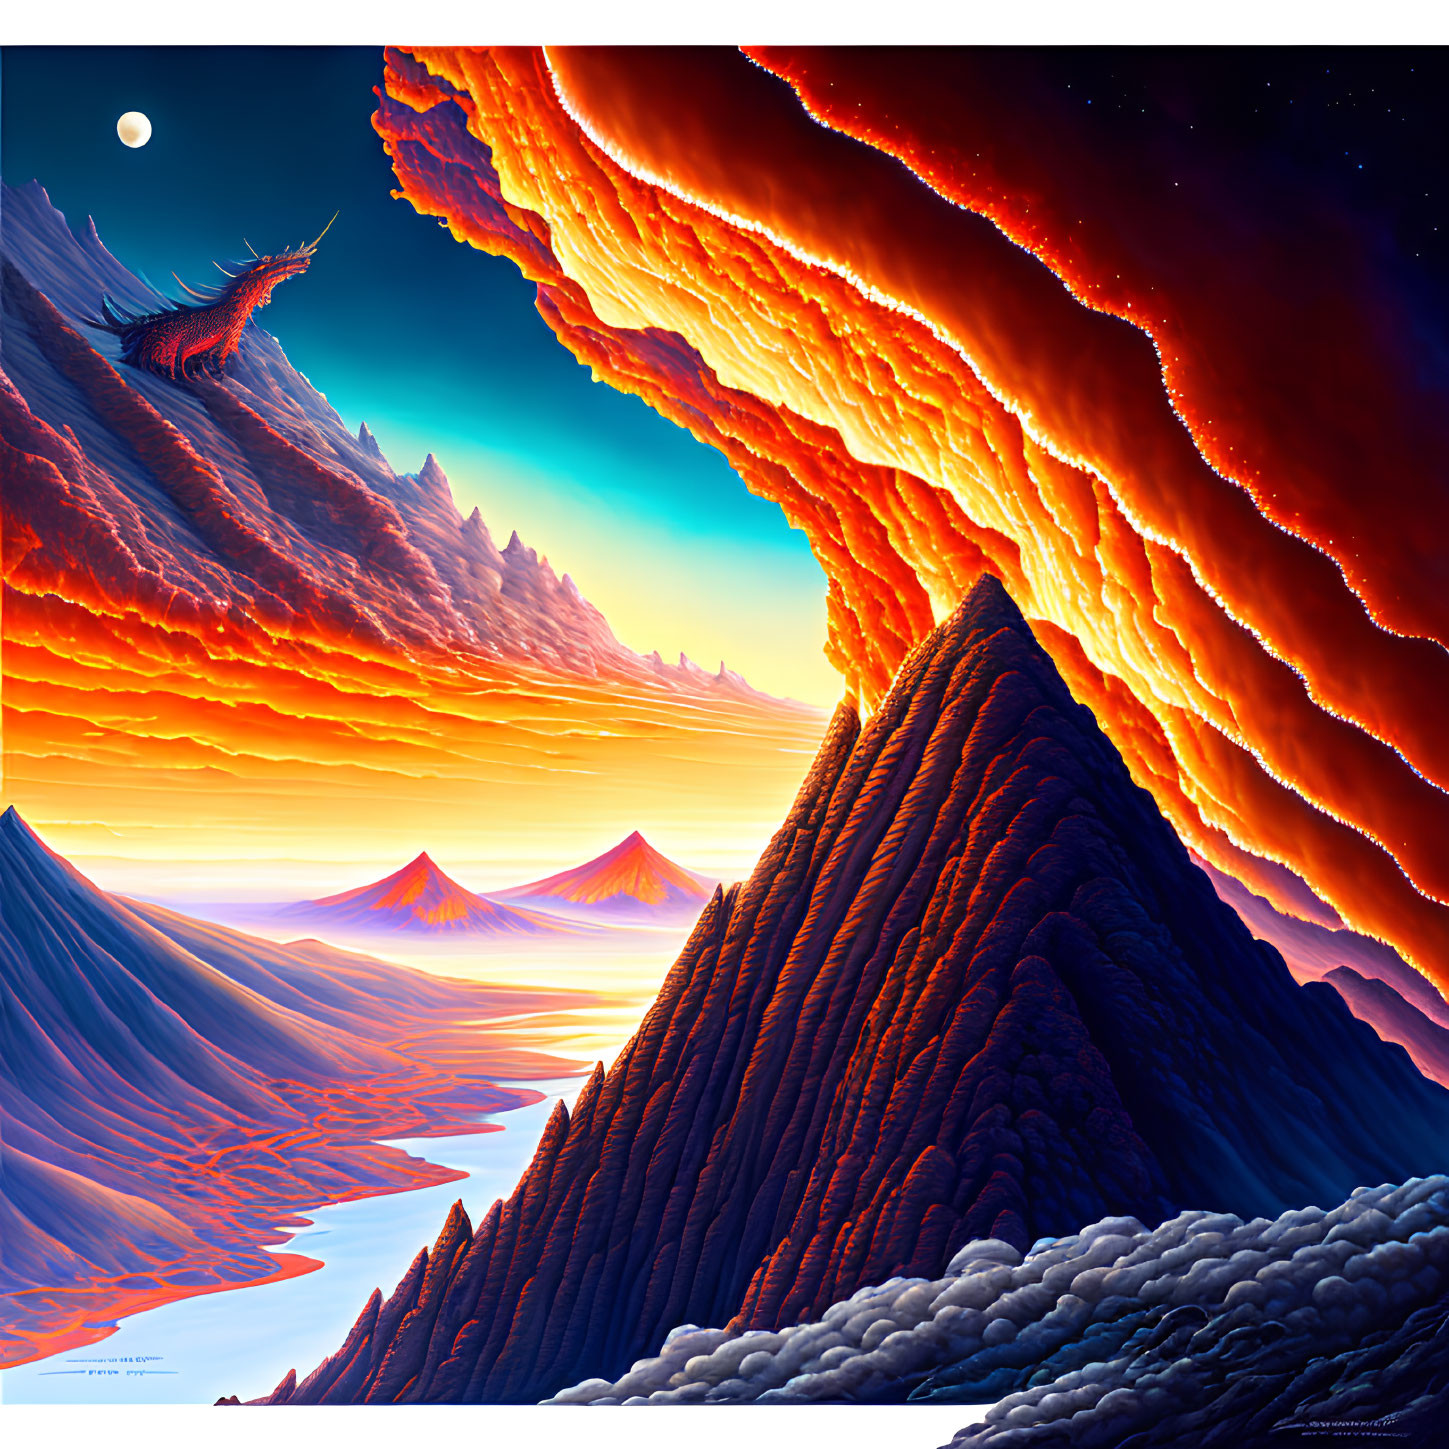 Sci-fi landscape with fiery sky waves, river, volcanic mountains, starry night sky, and moon